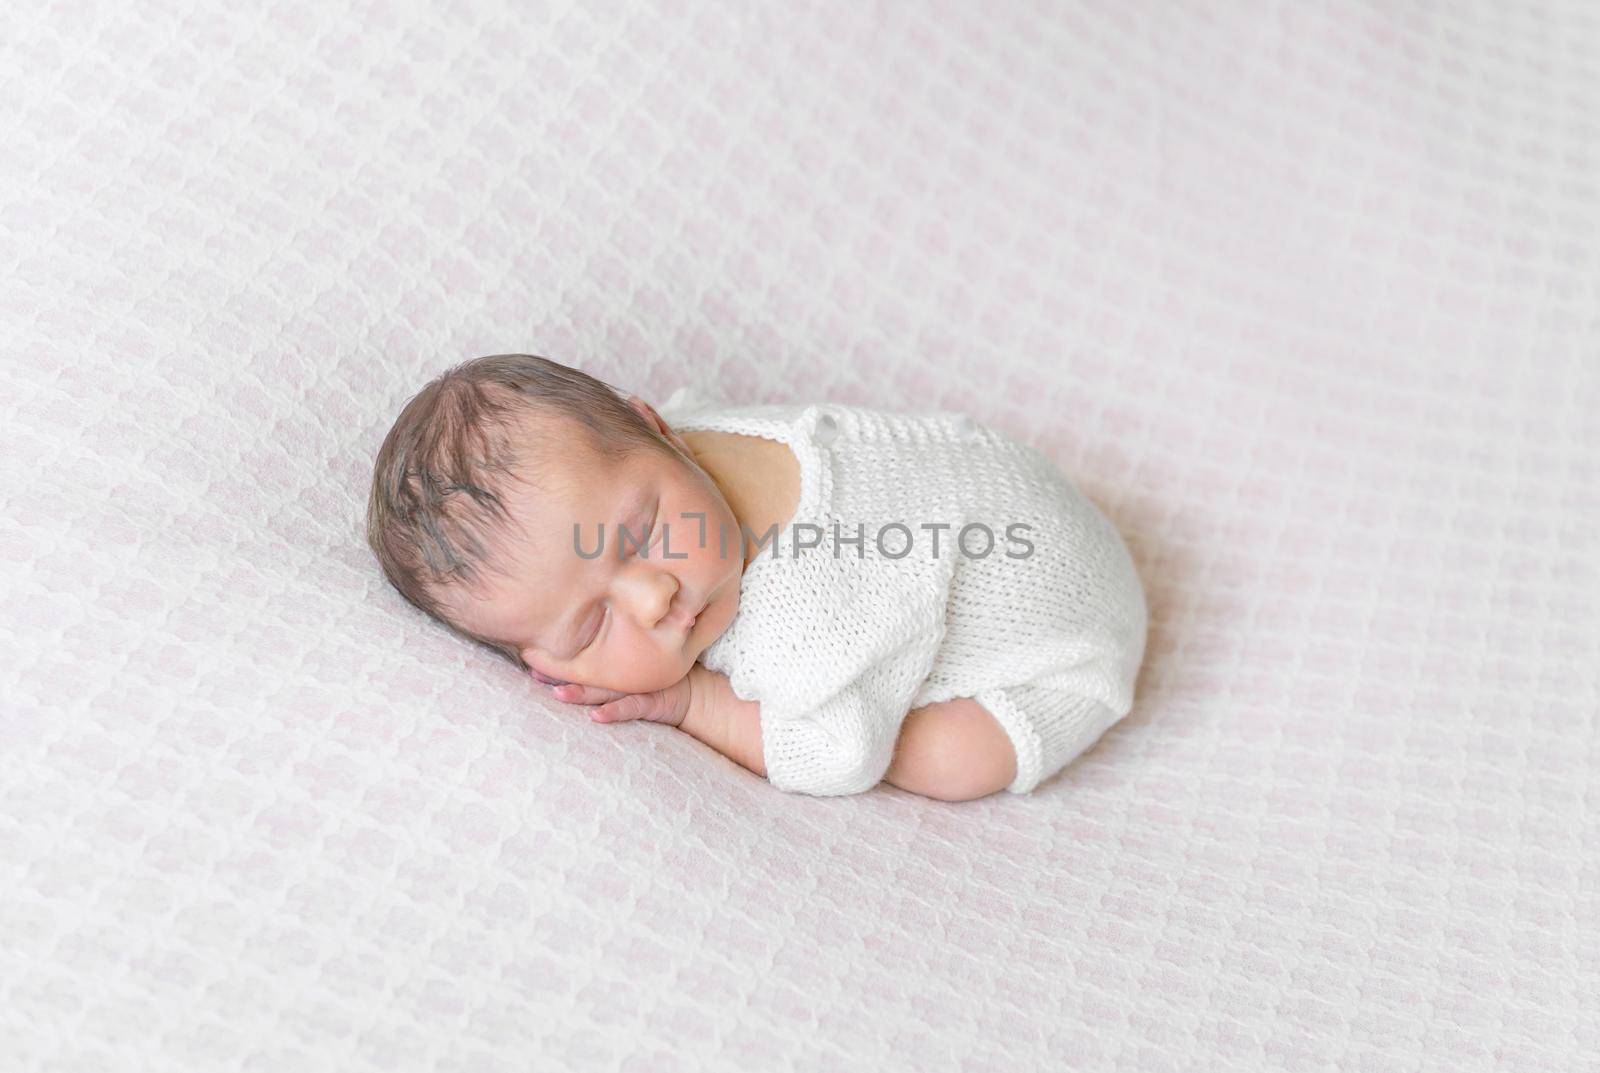 Sweet baby sleeping curled up on his belly, wearing white suit, on pink soft surface